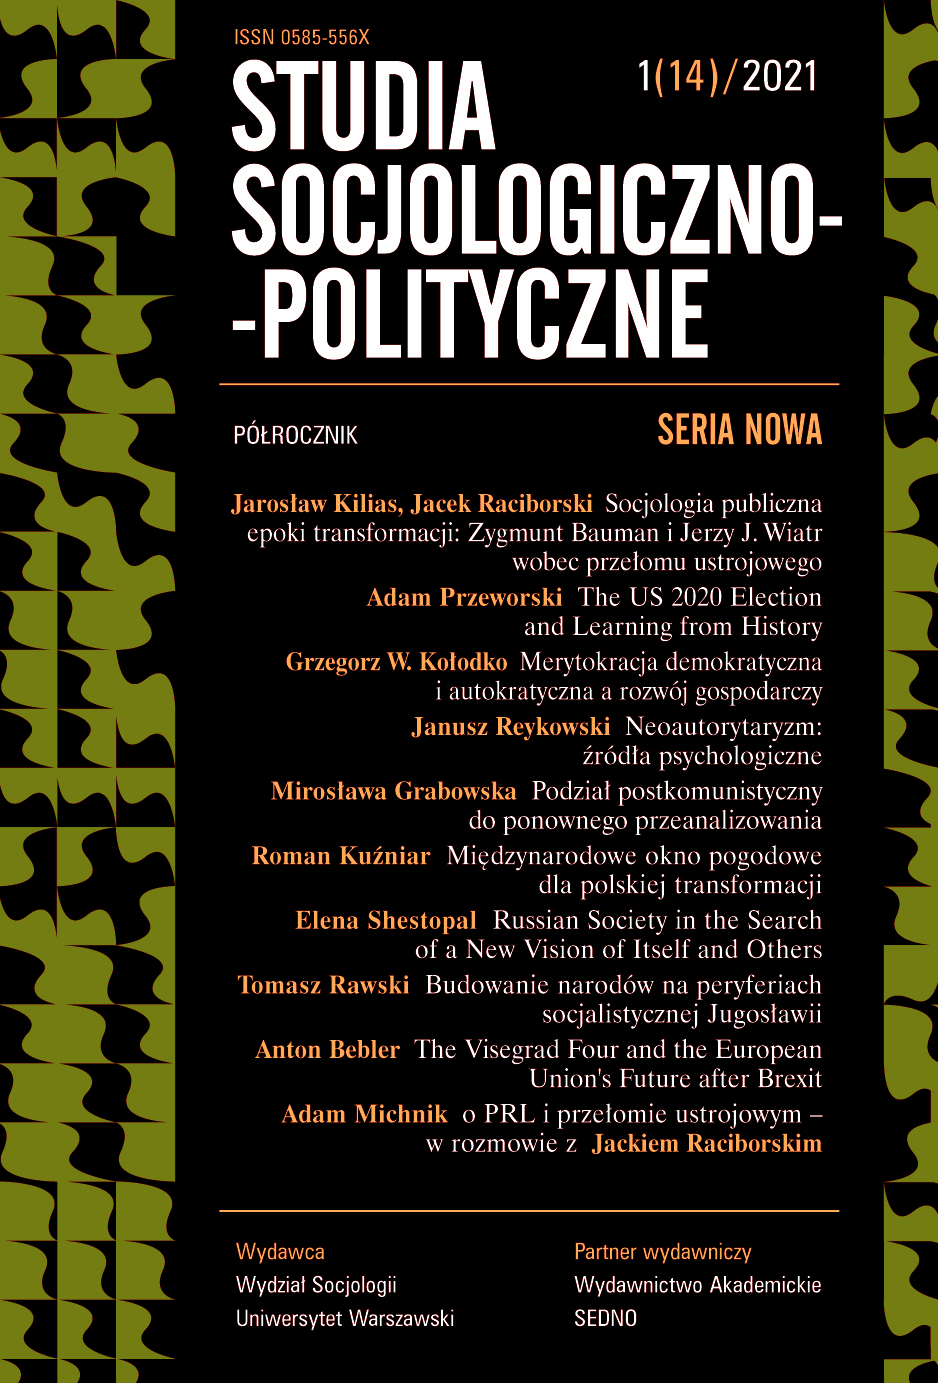 Public Sociology of the Transition Period: Zygmunt Bauman and Jerzy J. Wiatr Confront the Political System Change Cover Image